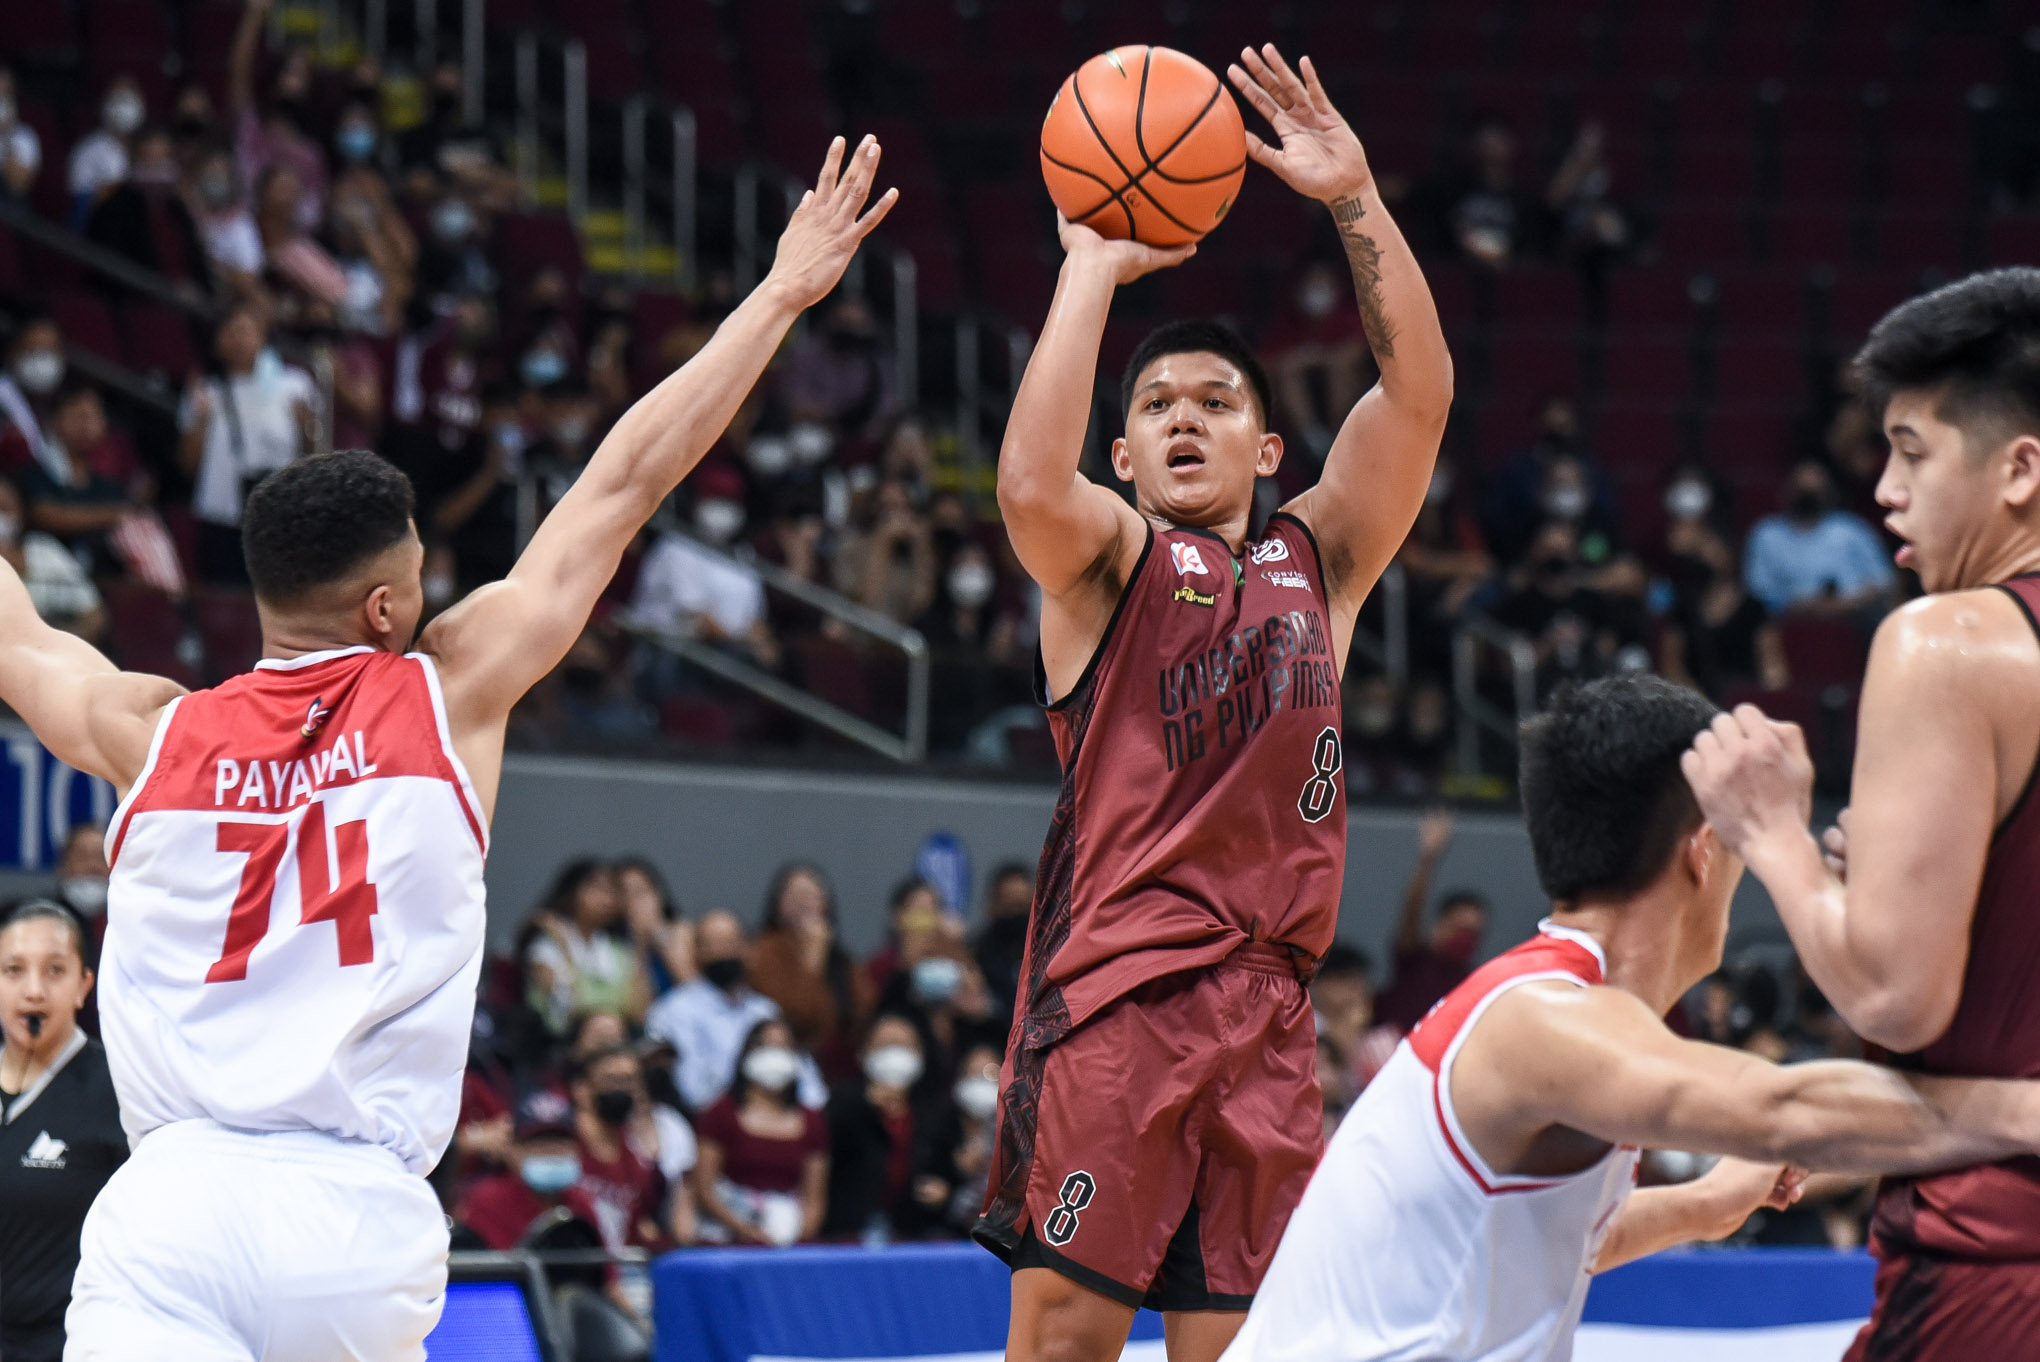 UAAP: Always ready to help, Gerry Abadiano steps up for UP